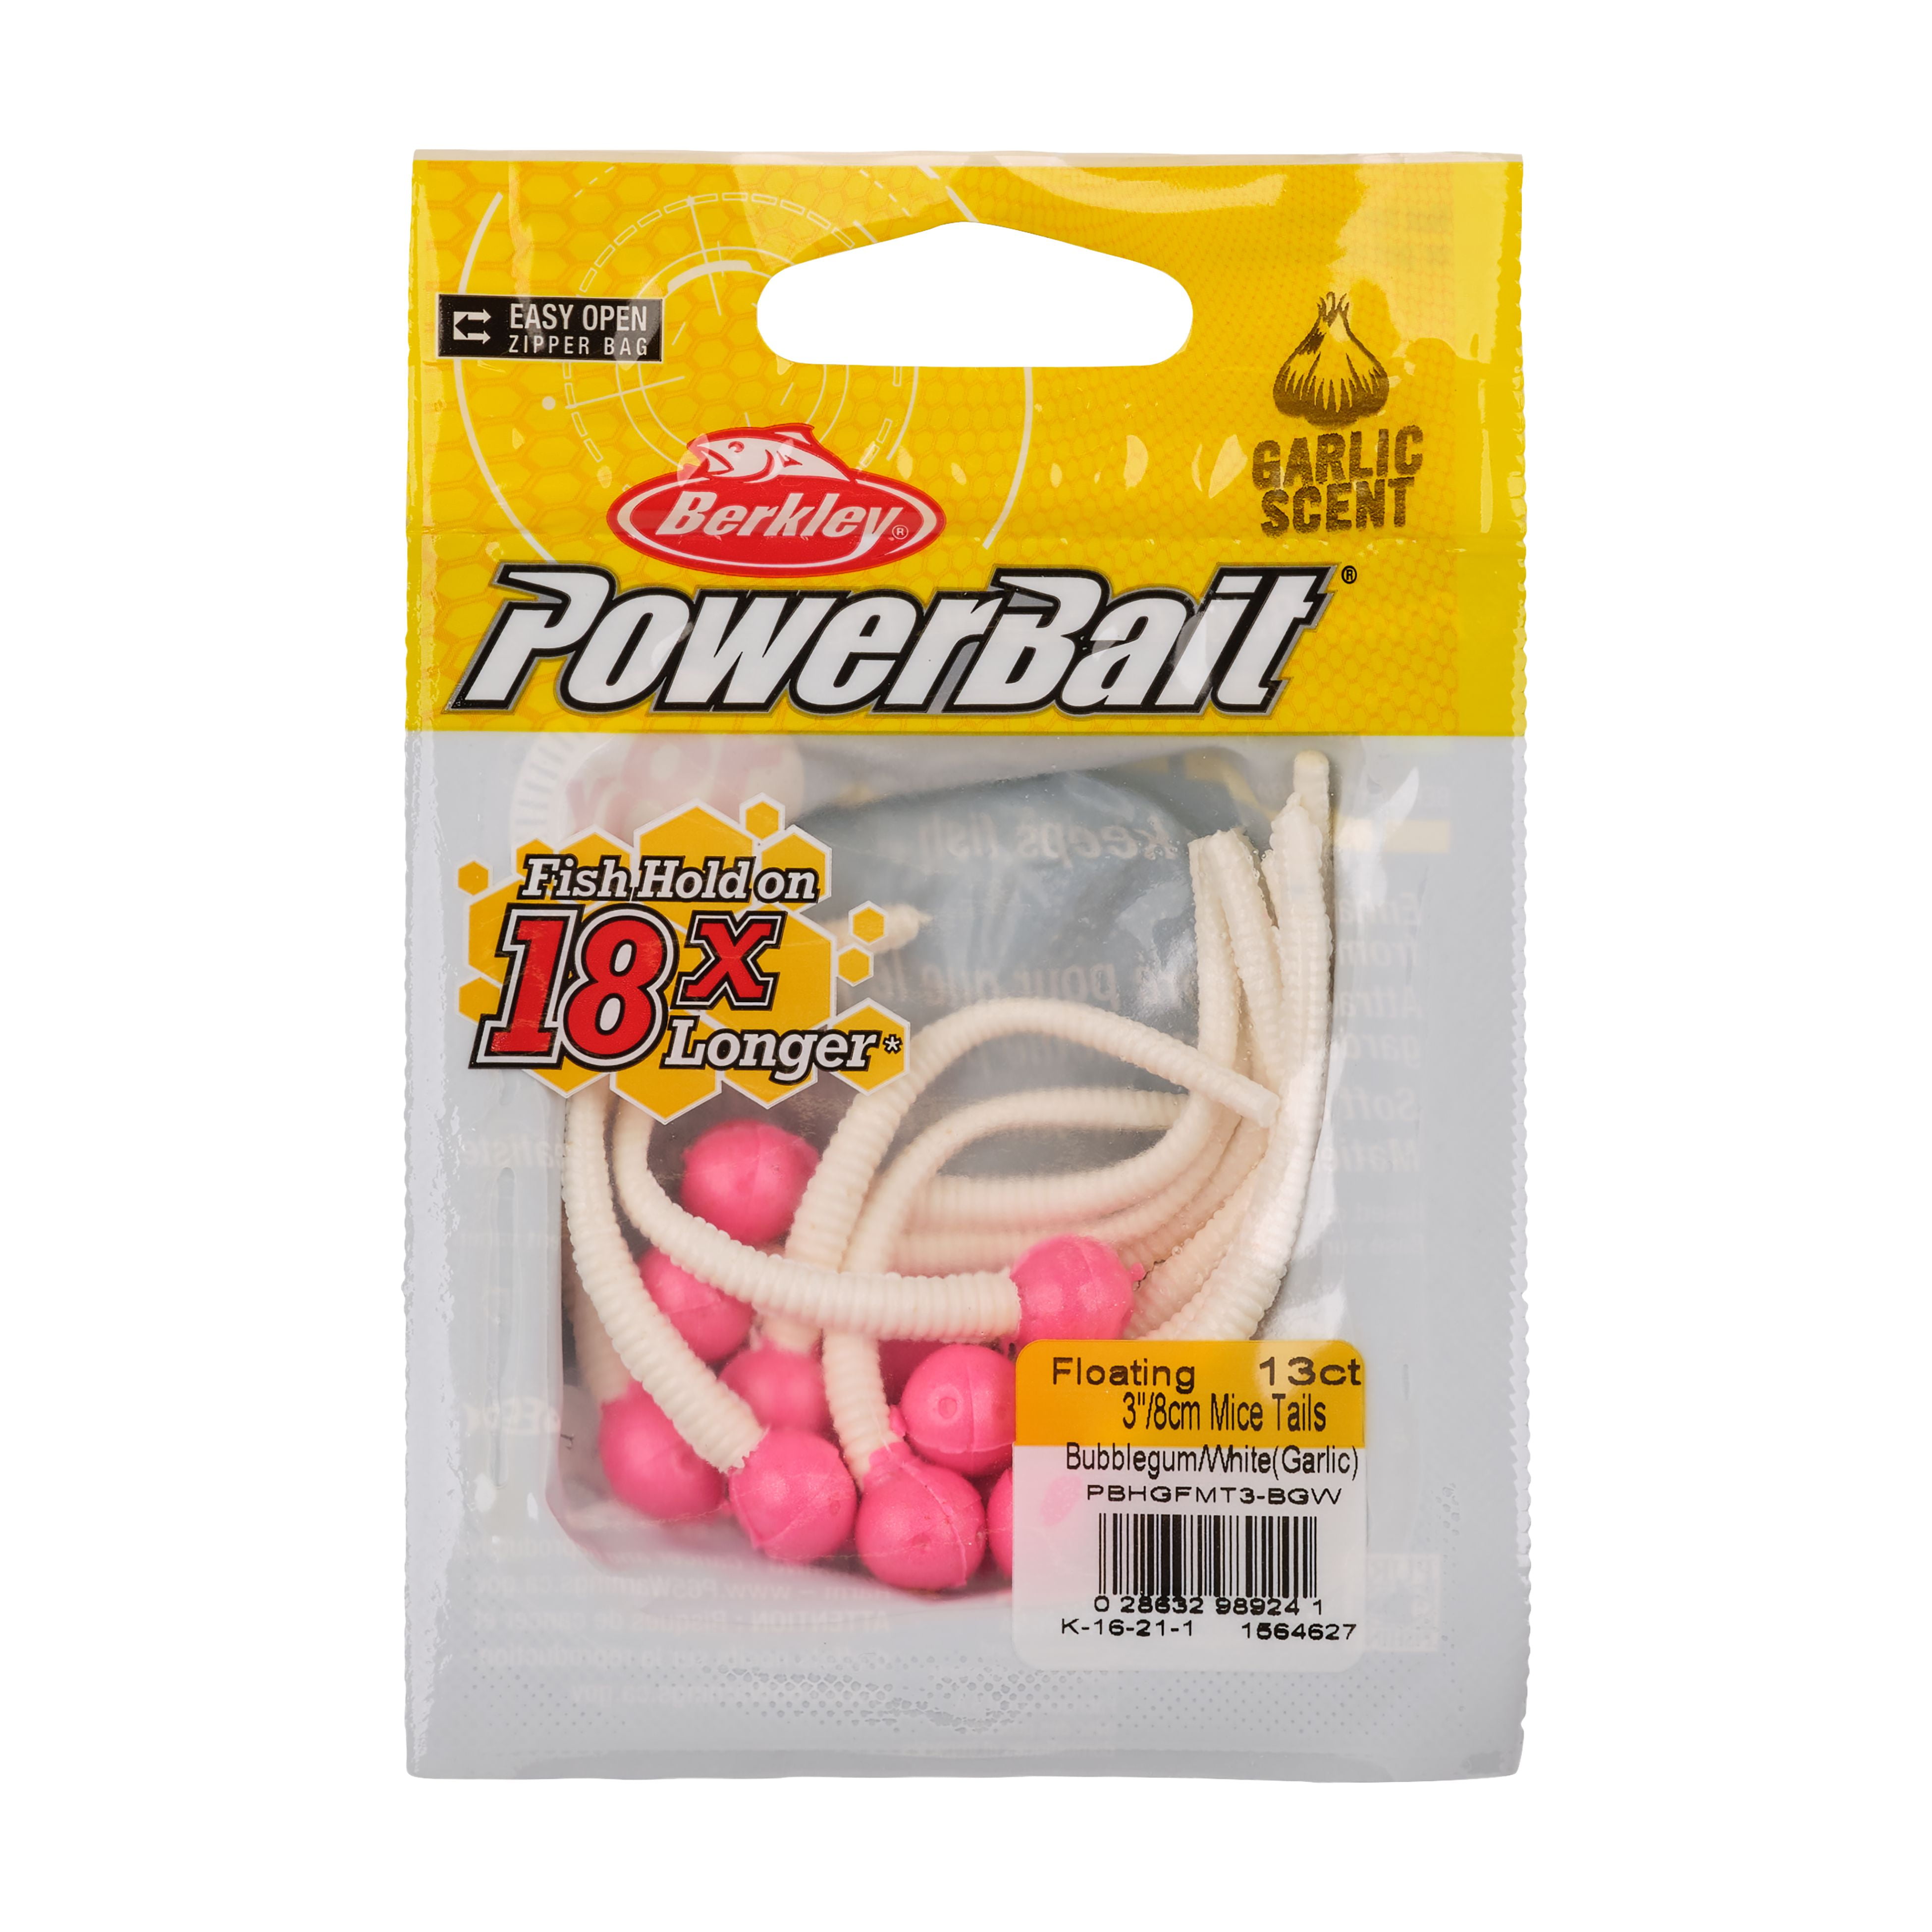 Berkley PowerBait Floating Mouse Tail with Garlic Scent